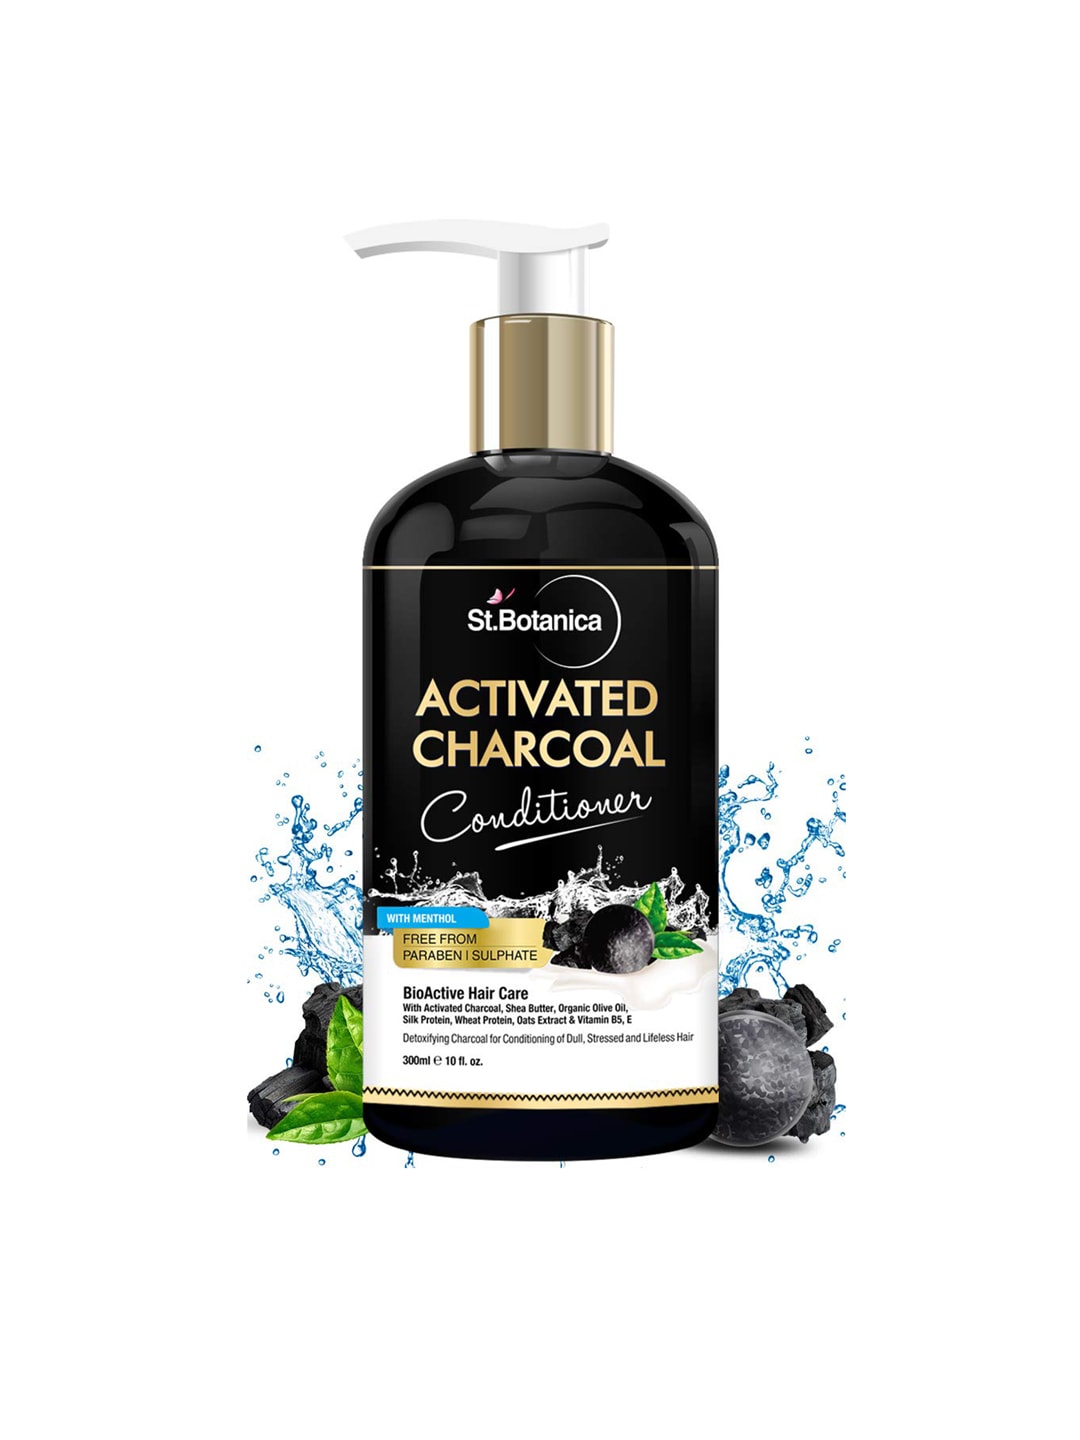 St.Botanica Activated Charcoal Hair Conditioner, 300ml Price in India